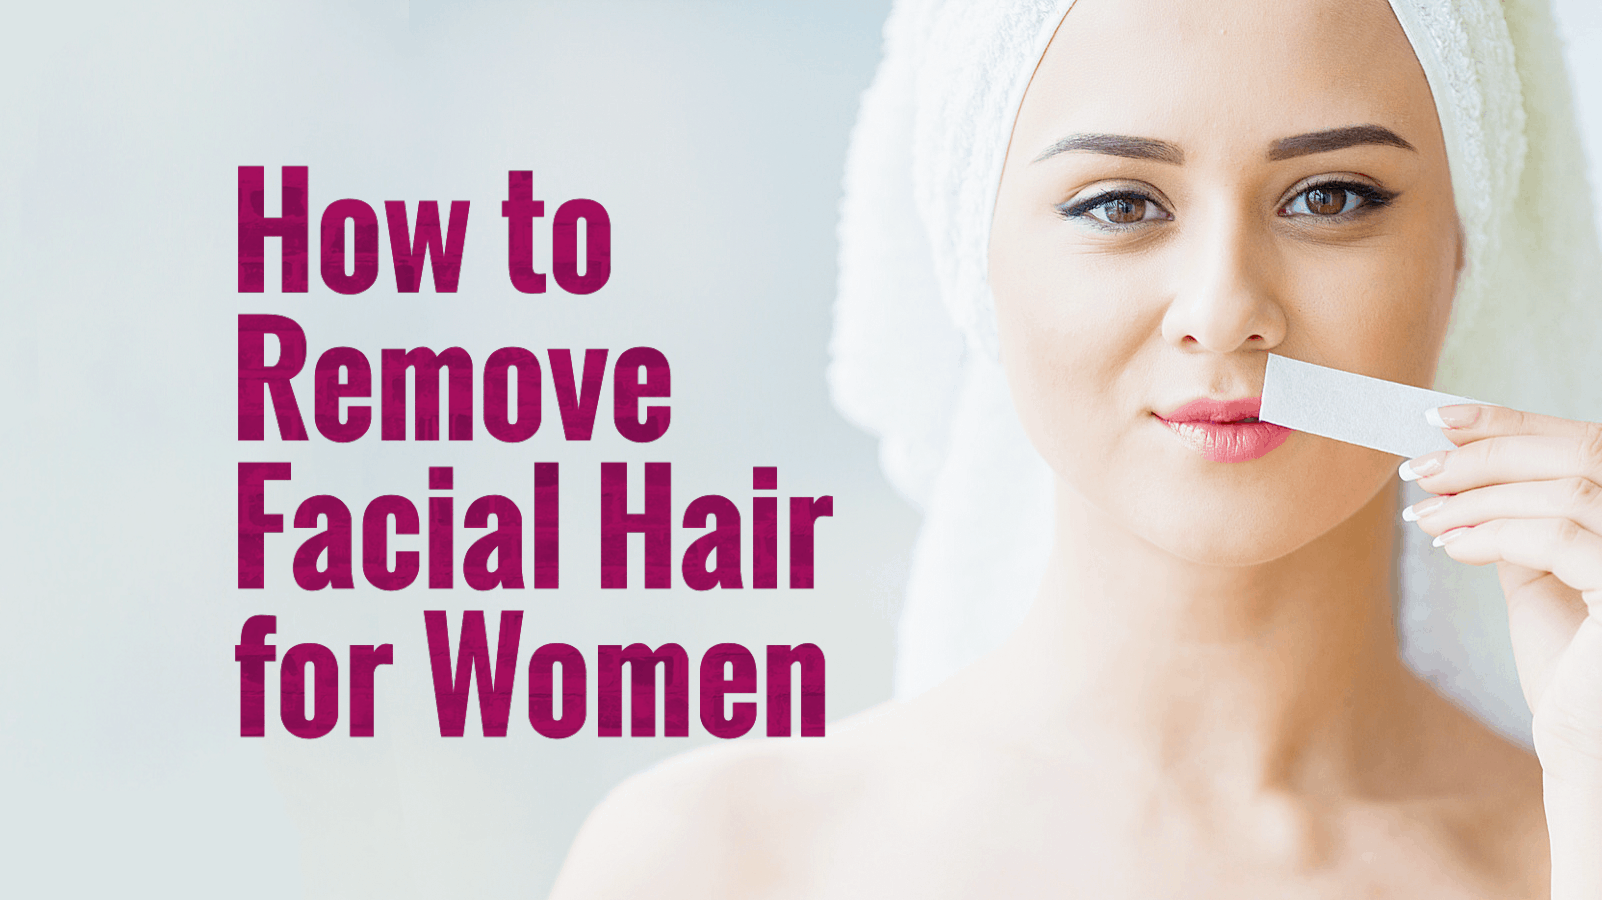 How to Remove Facial Hair for Women | Power of Positivity